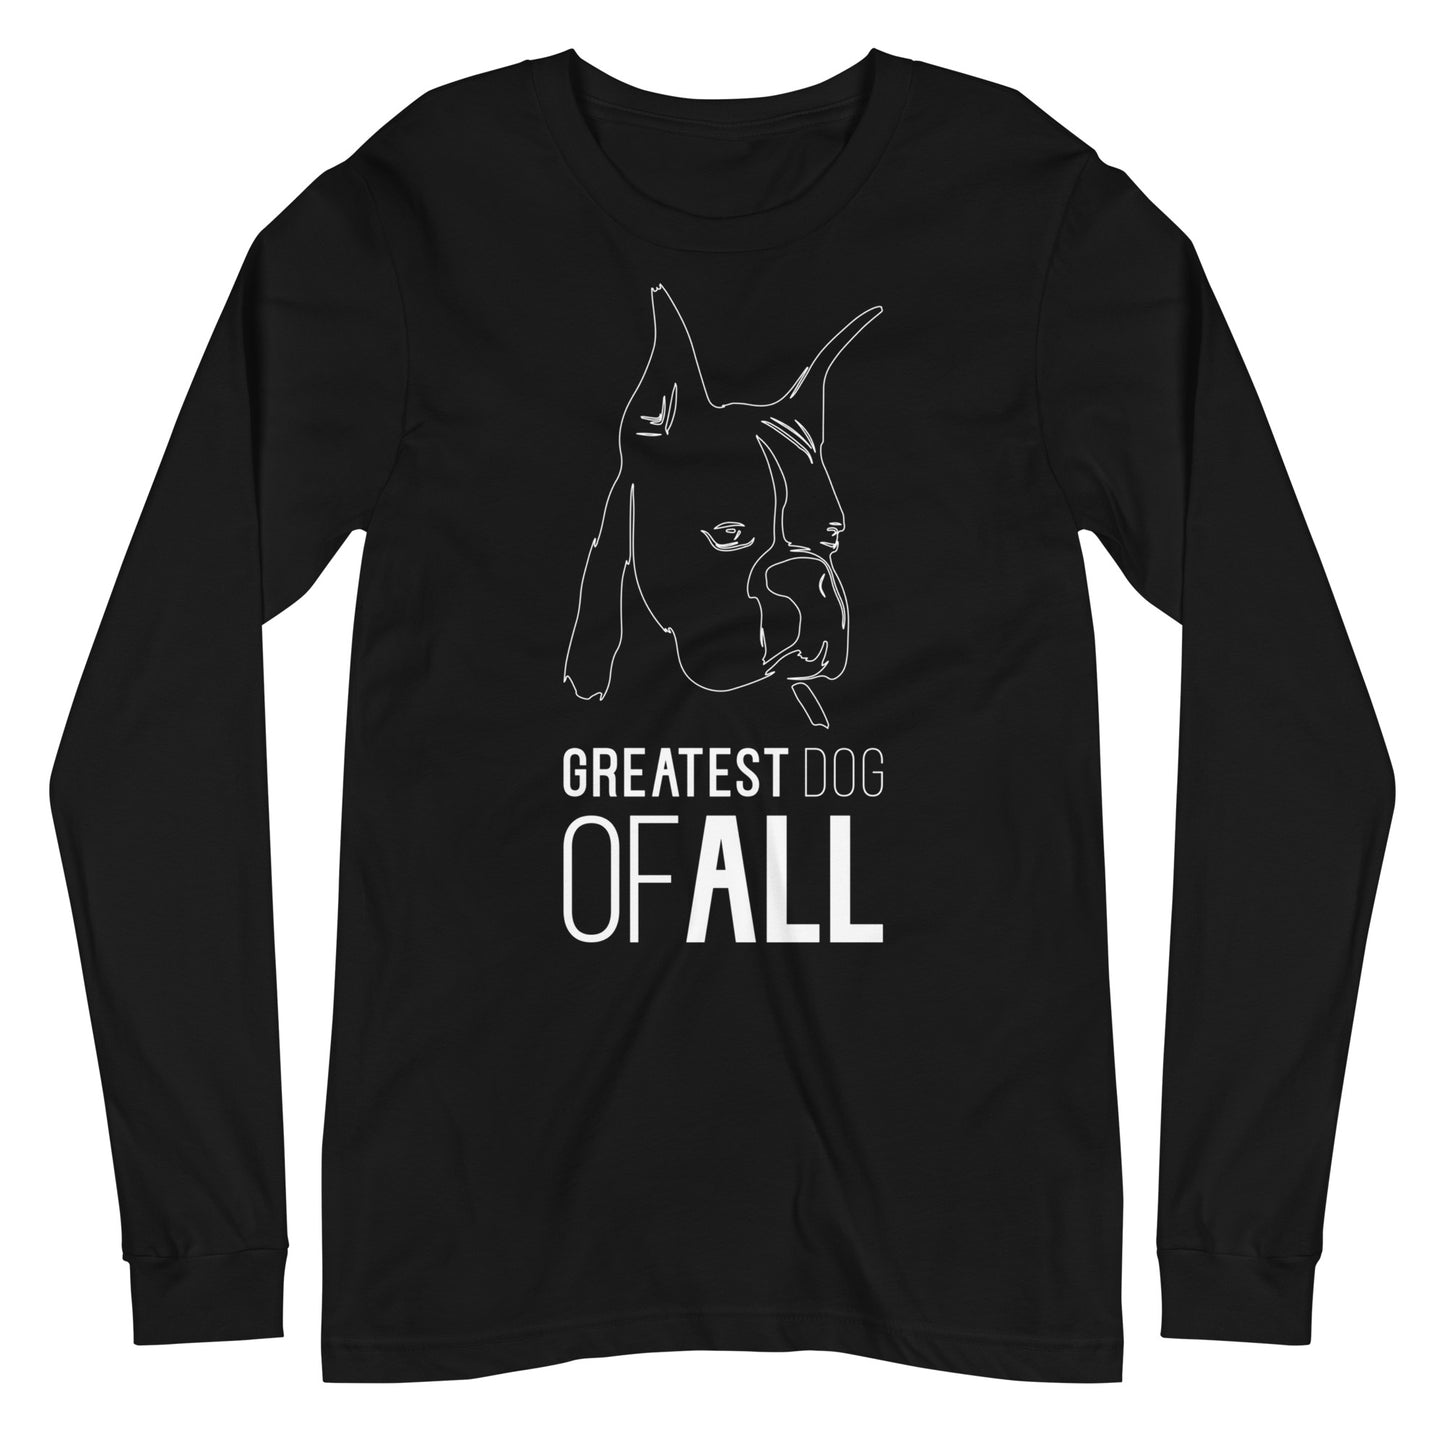 White line Boxer face with Greatest Dog of All caption on unisex black long sleeve t-shirtWhite line Boxer face with Greatest Dog of All caption on unisex black long sleeve t-shirt